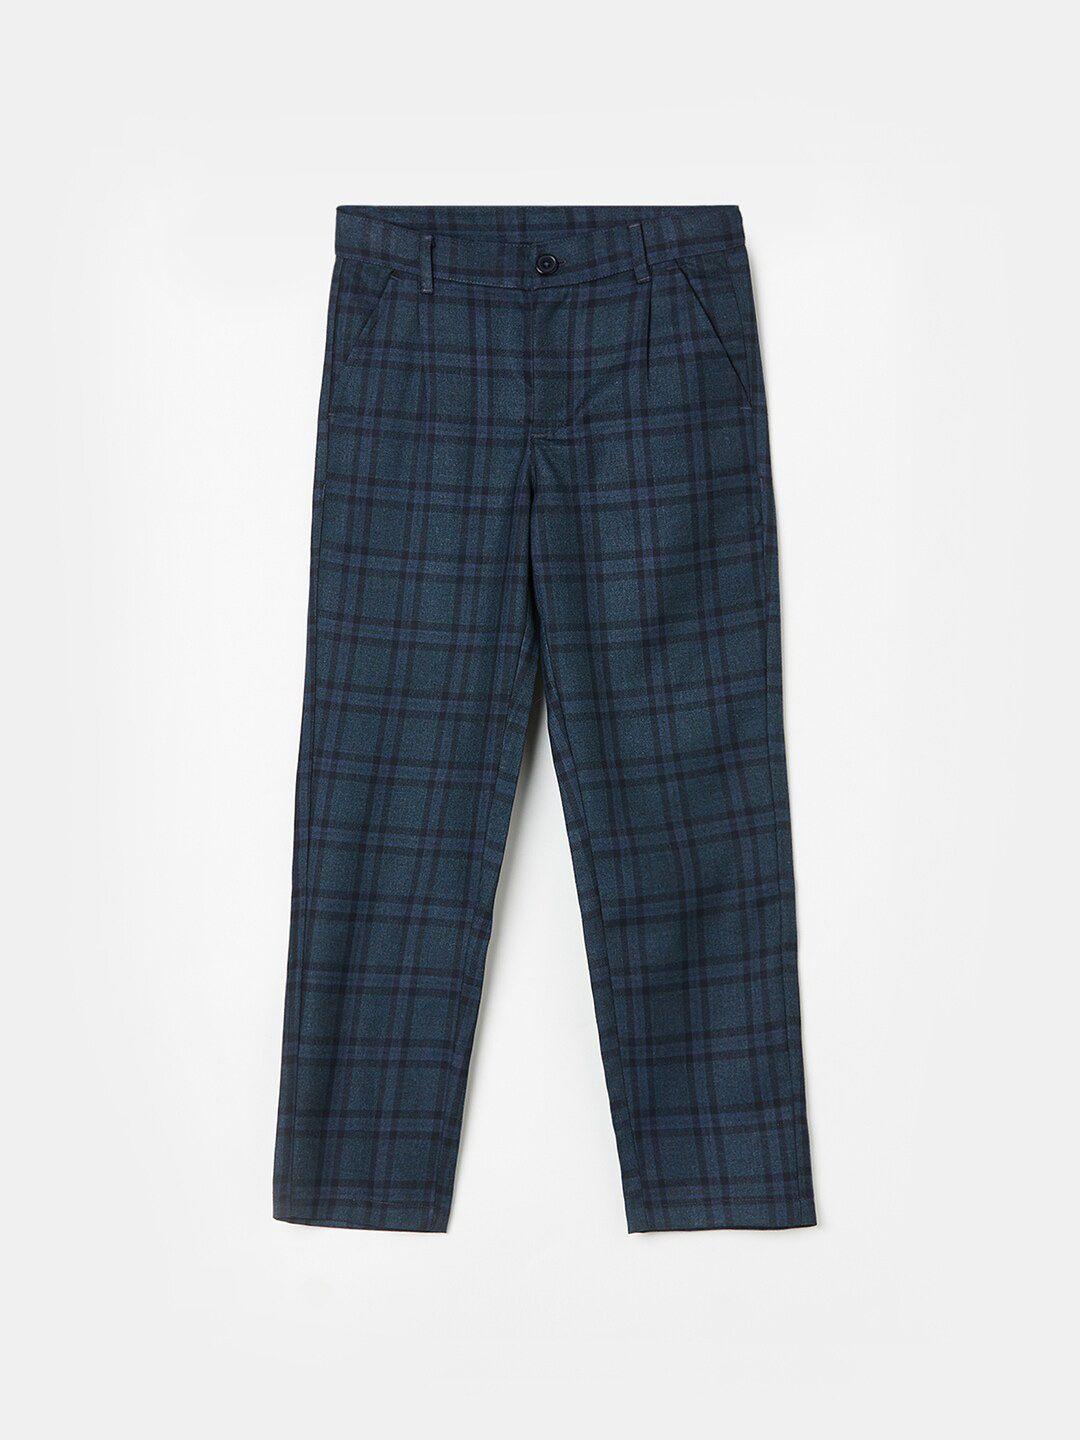 fame-forever-by-lifestyle-boys-checked-mid-rise-plain-trousers